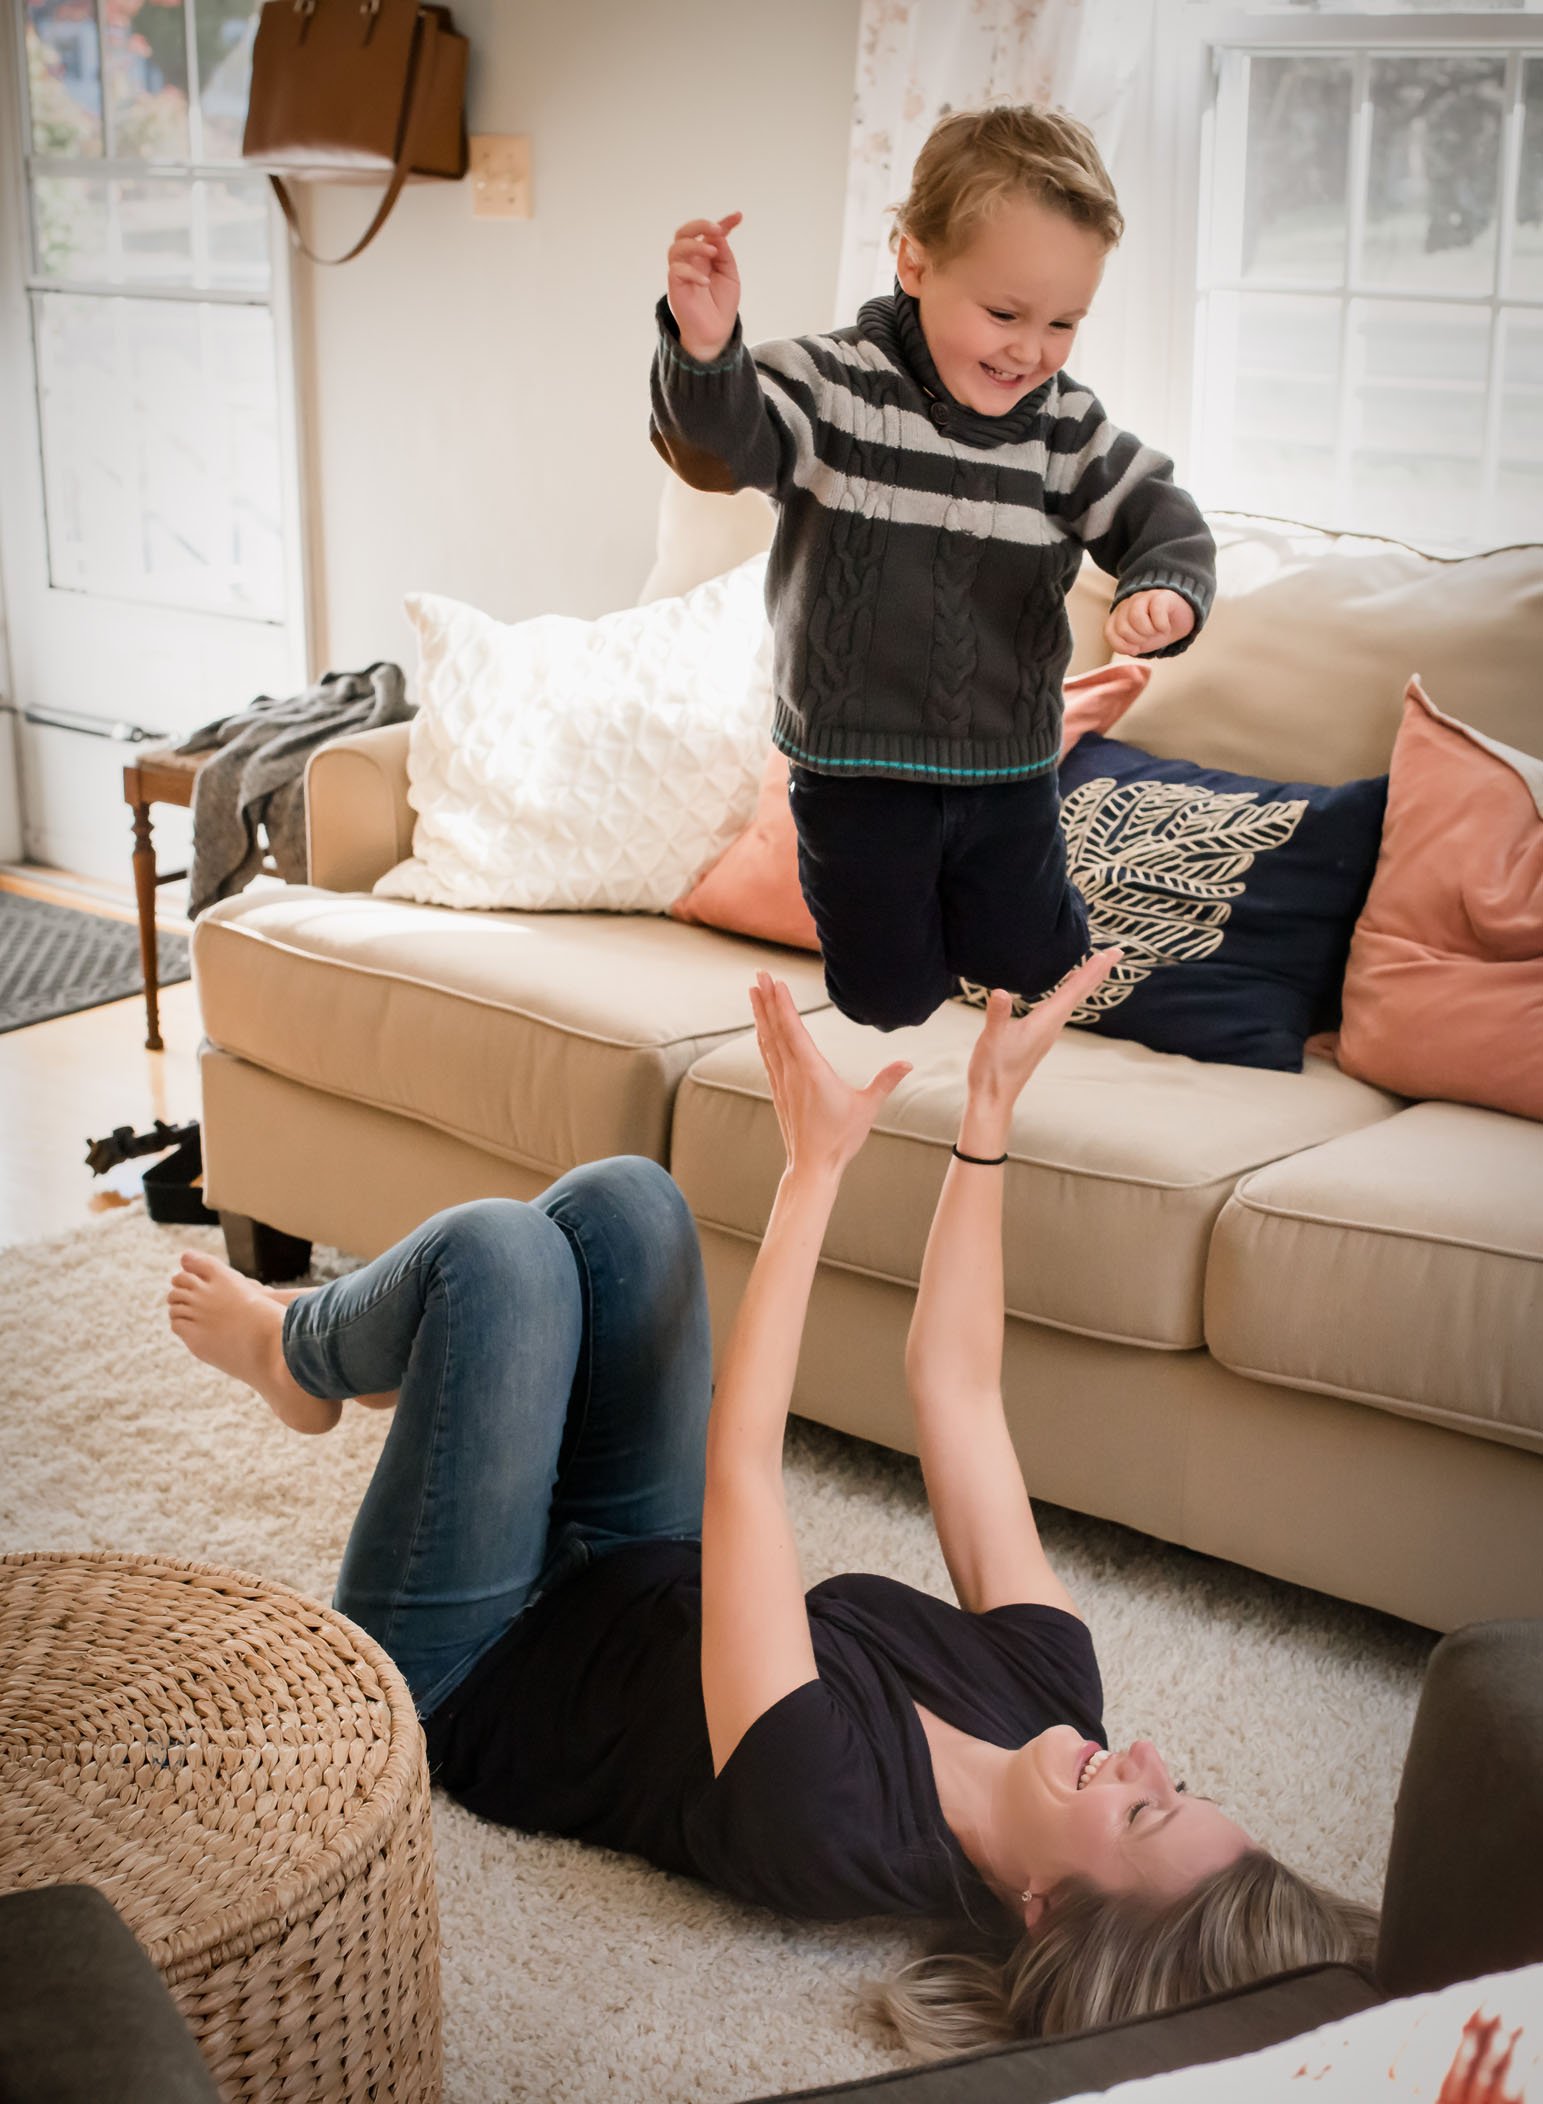 4 year old boy jumping off couch into mom's waiting arms